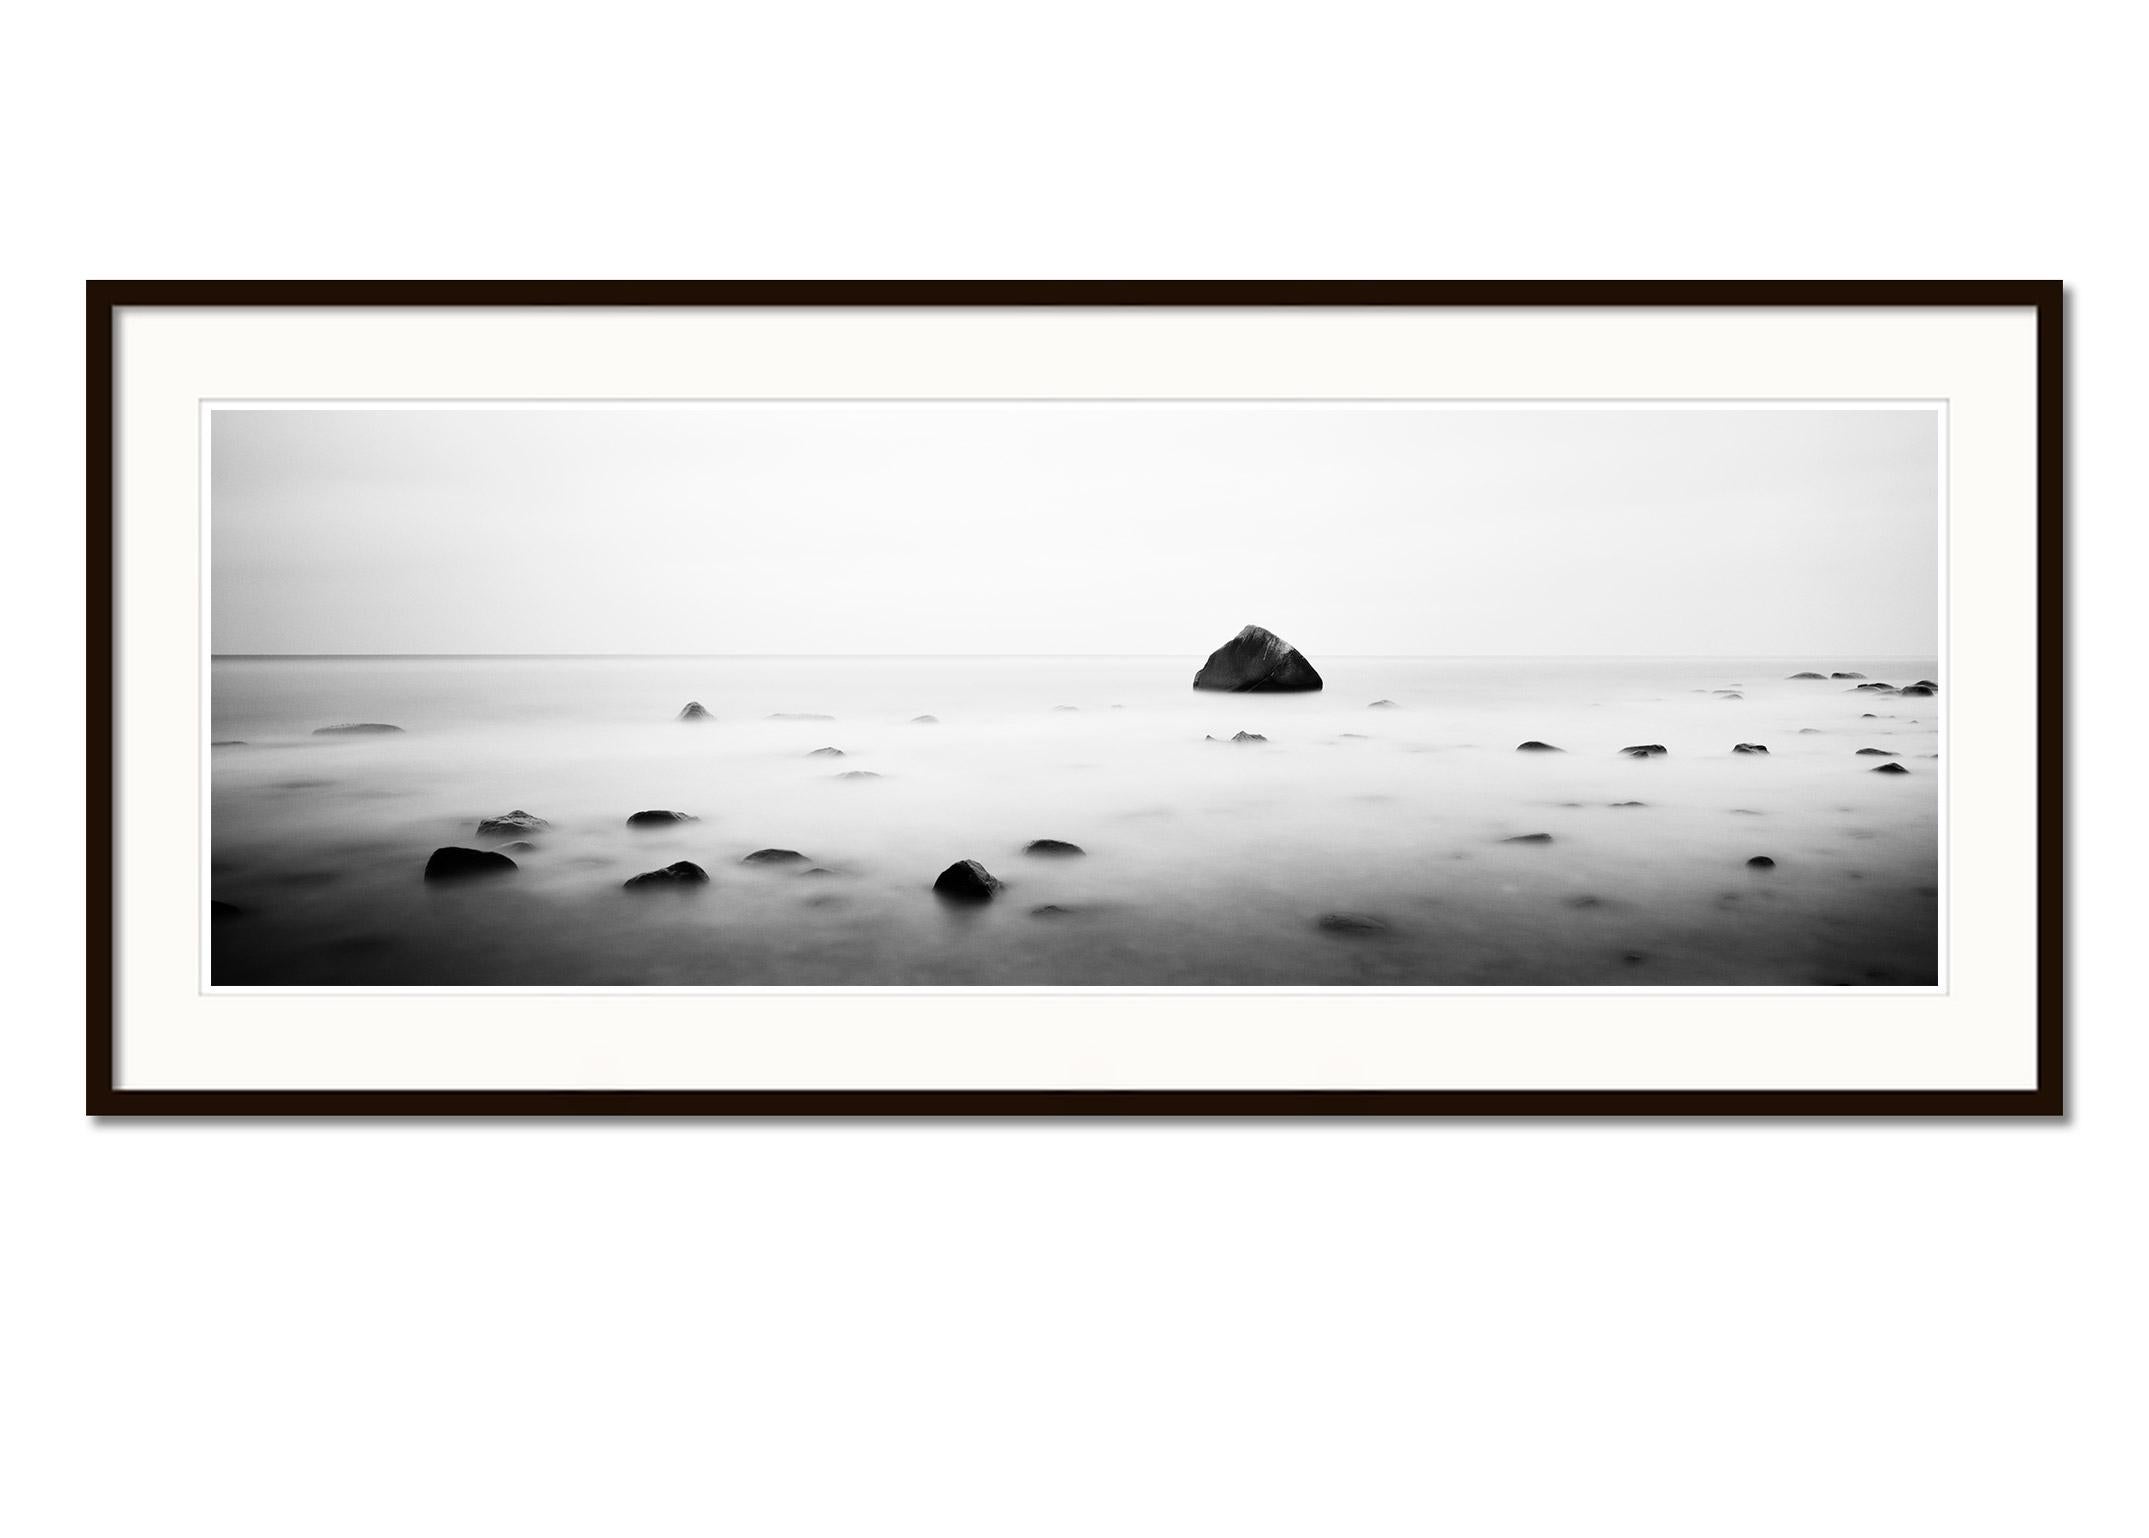 Black and white fine art panorama long exposure landscape - waterscape photography print. Glacial Erratic, Schwanenstein, Lohme, Rügen, Germany. Archival pigment ink print, edition of 9. Signed, titled, dated and numbered by artist. Certificate of